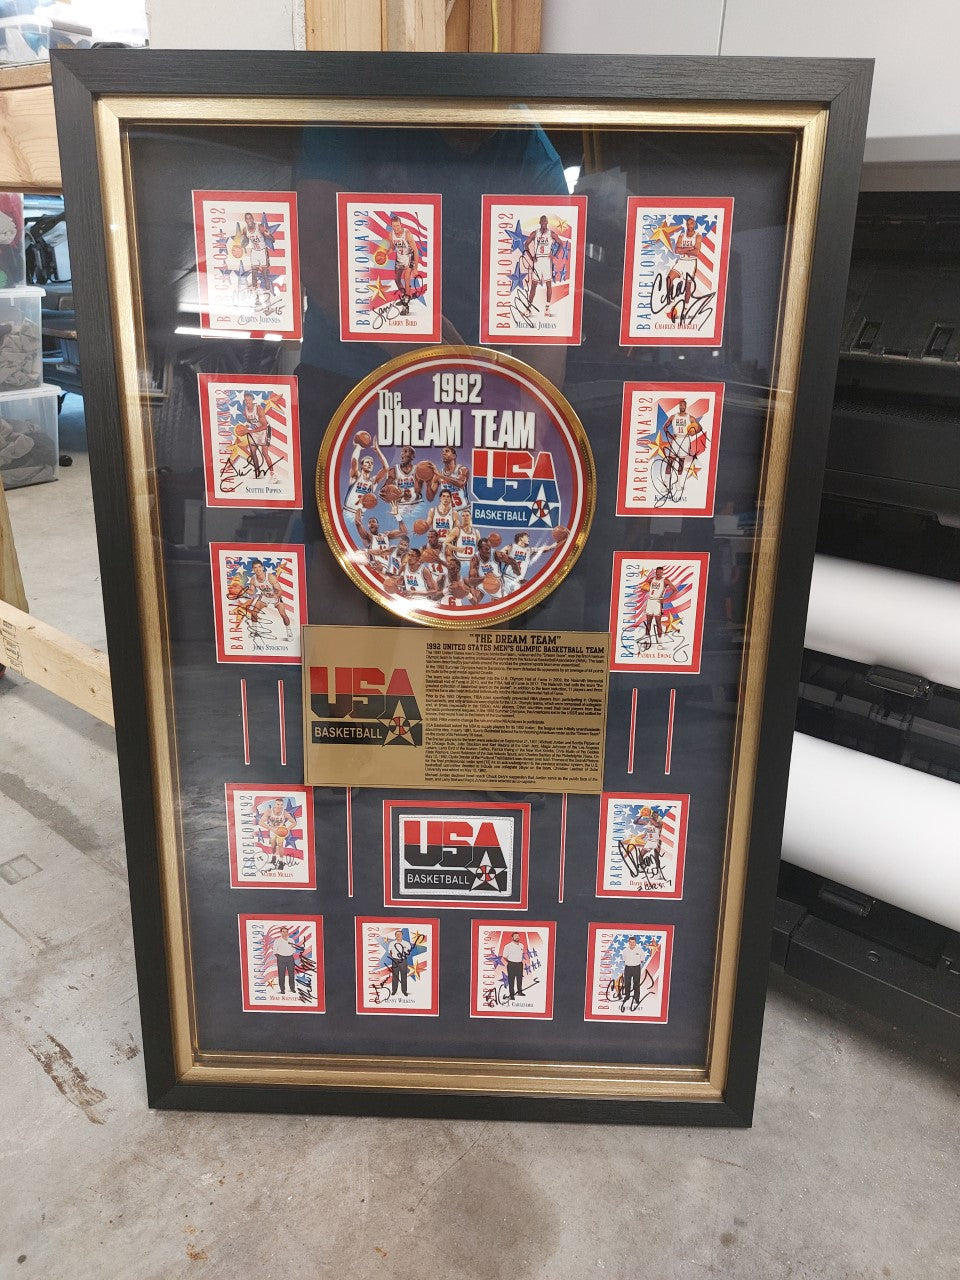 Michael Jordan, Larry Bird, Chuck Daly 1992 Dream Team MASTER SET DREAM TEAM 1991 SKYBOX USA basketball cards signed and framed 24x36 with proof